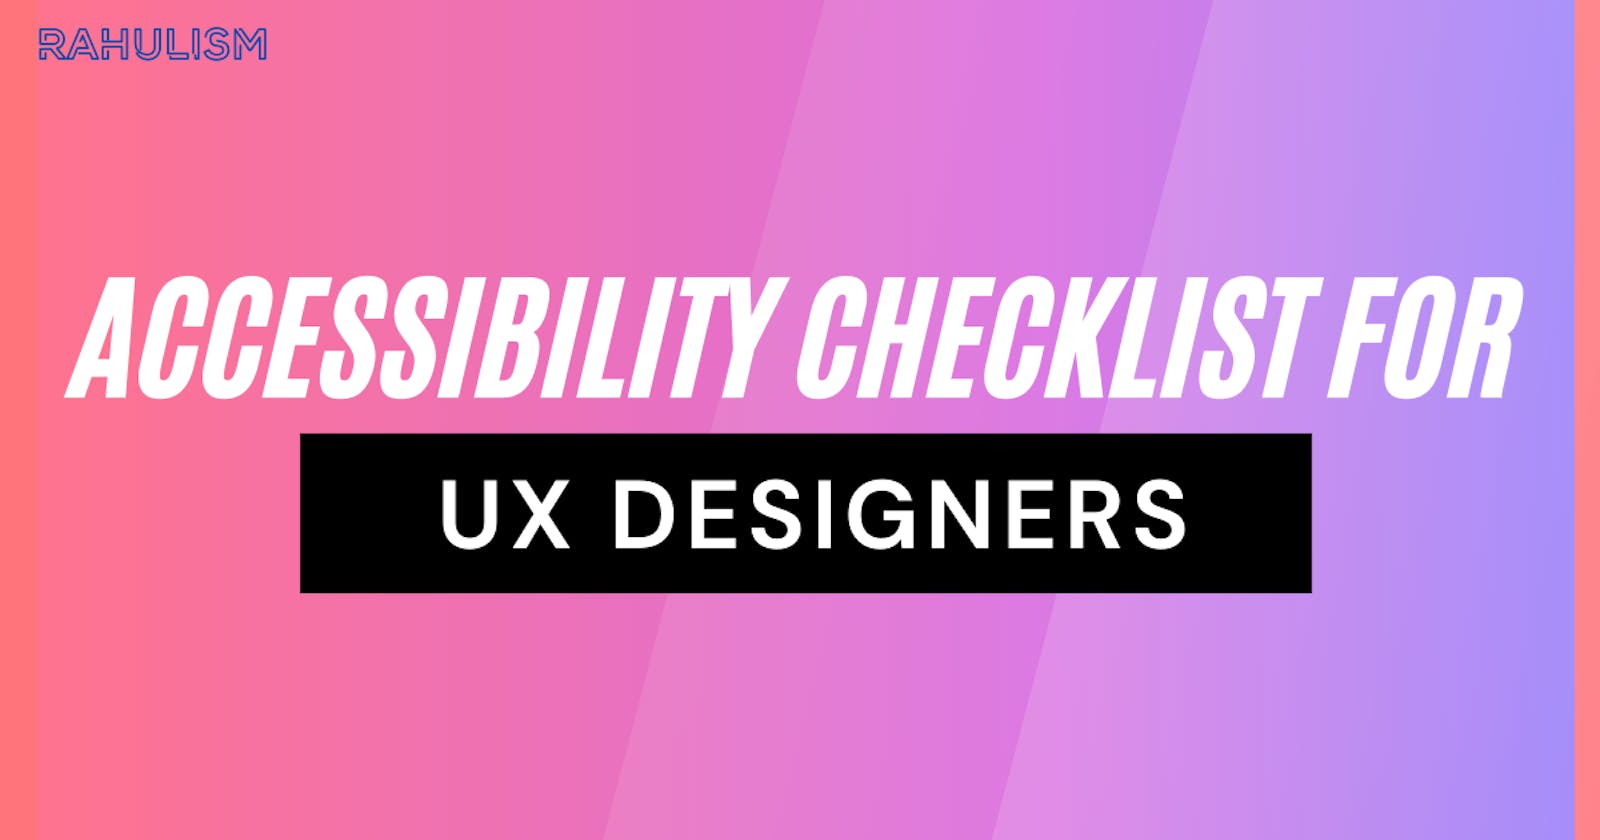 Accessibility checklist for UX Designers